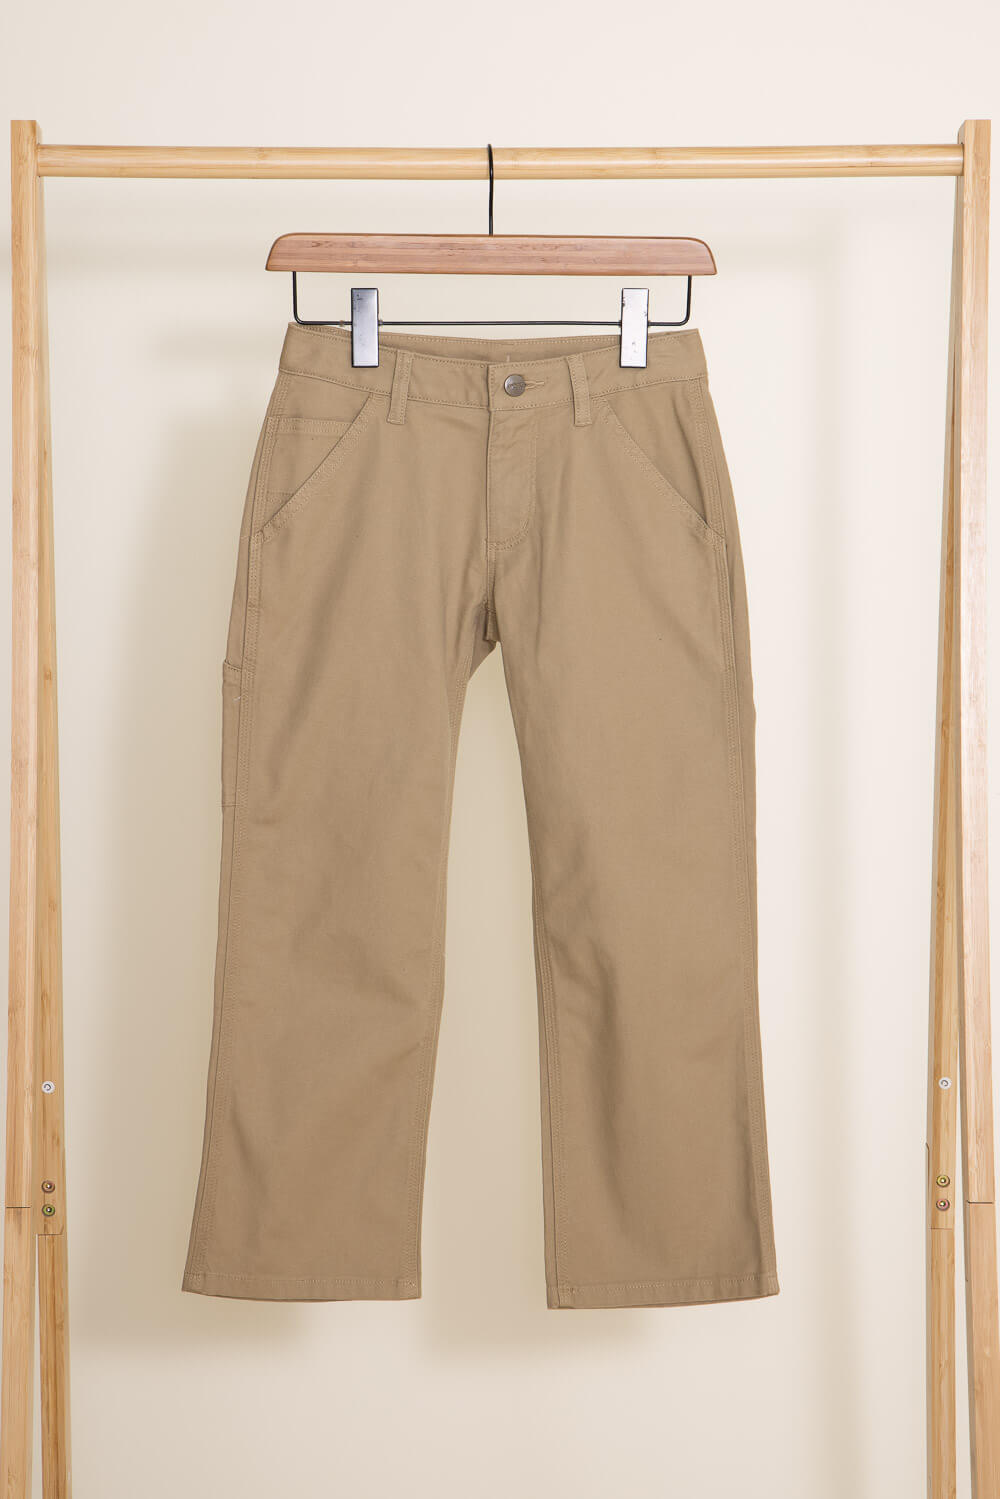 Carhartt Cargo Pants Review How Tough Are They  Tested by Bob Vila